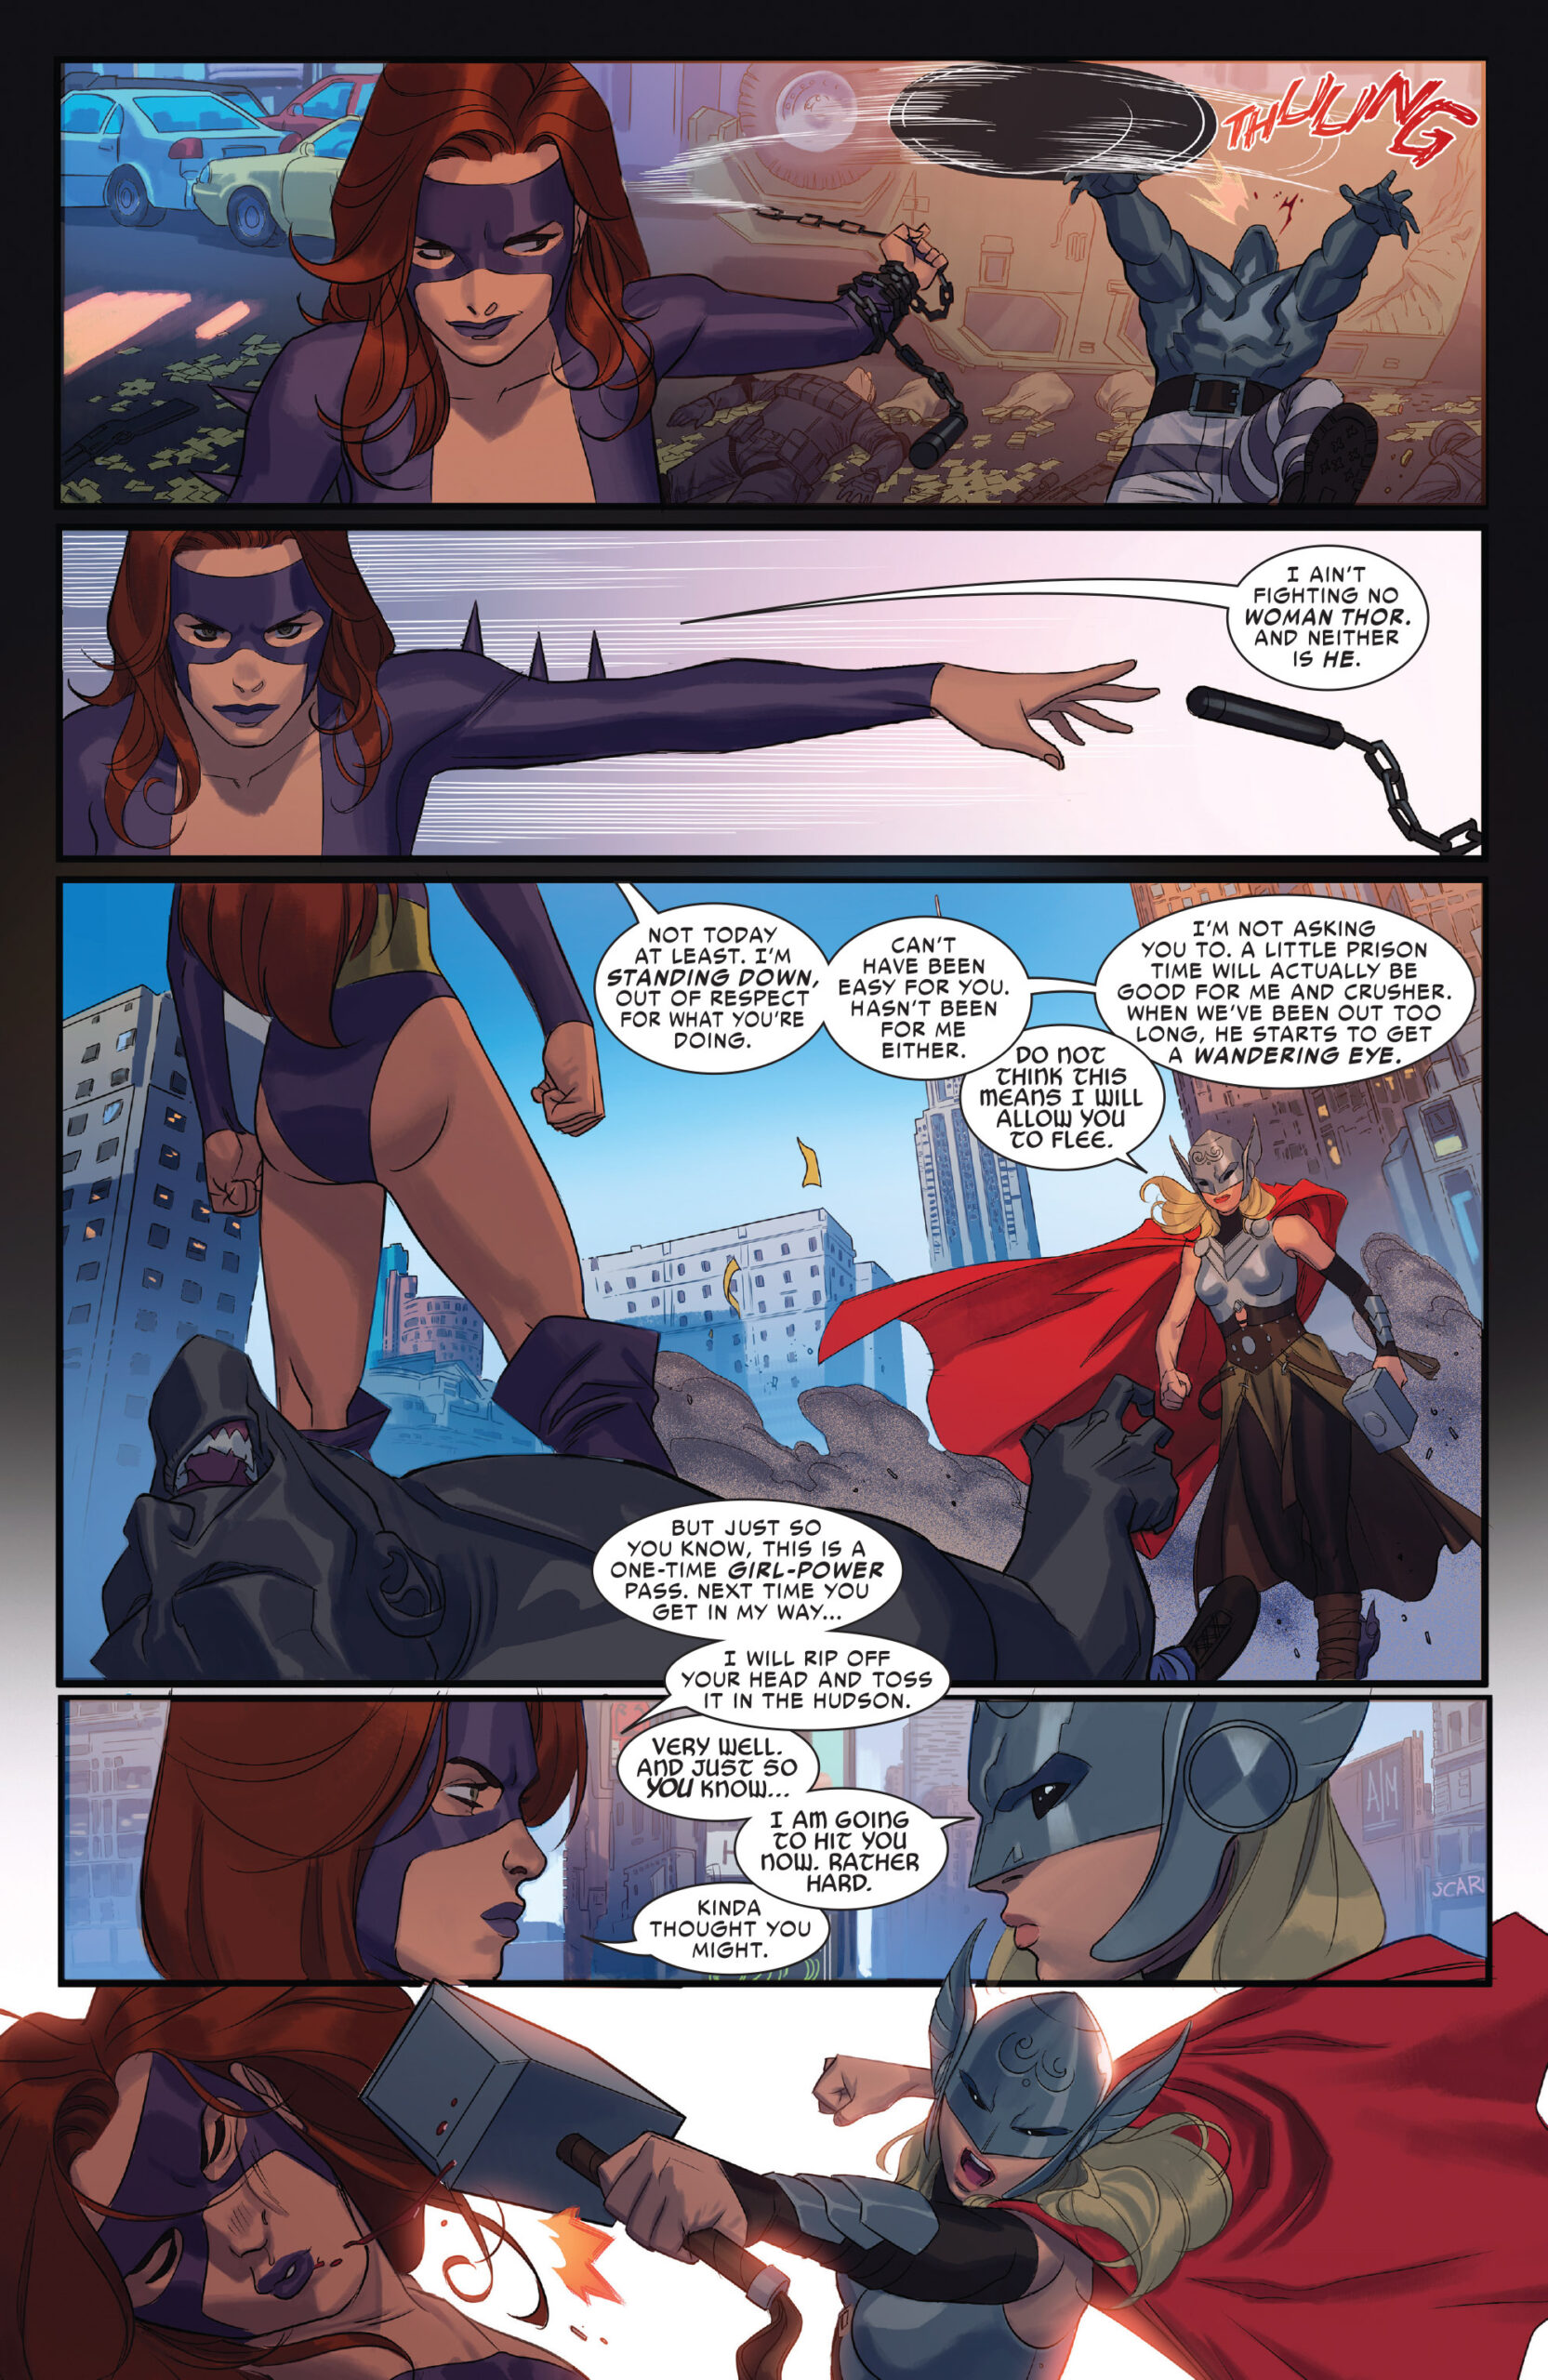 Titania throws down her weapon in a moment of feminist solidarity in Thor Vol. 4 #5 "Behold, A New Age of Thunder" (2015), Marvel Comics. Words by Jason Aaron, art by Jorge Molina and Joe Sabino.